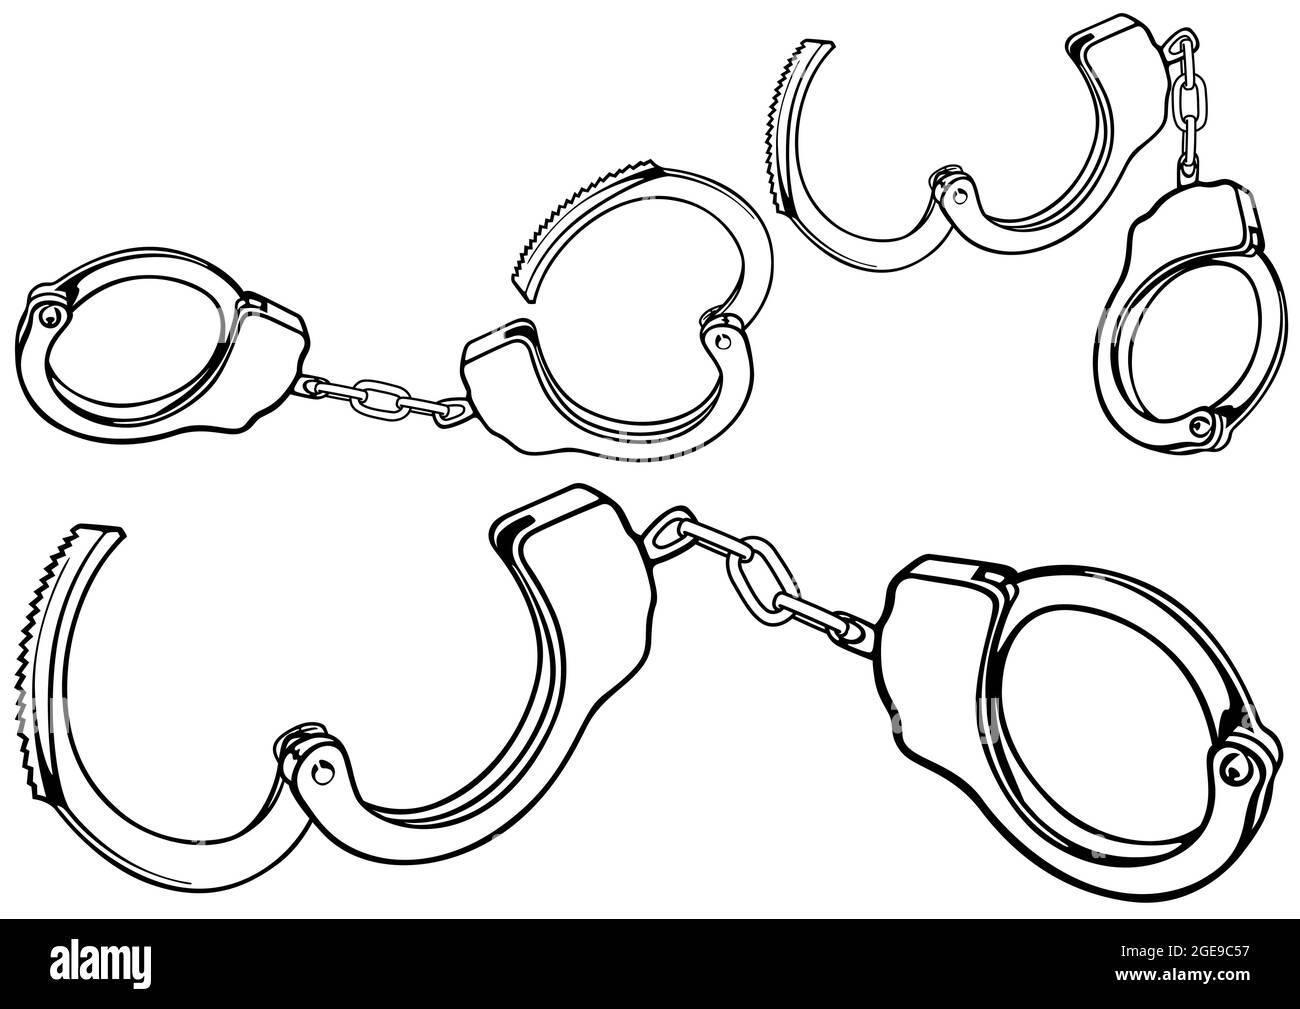 Hand Drawn Sketch of Handcuffs Stock Vector